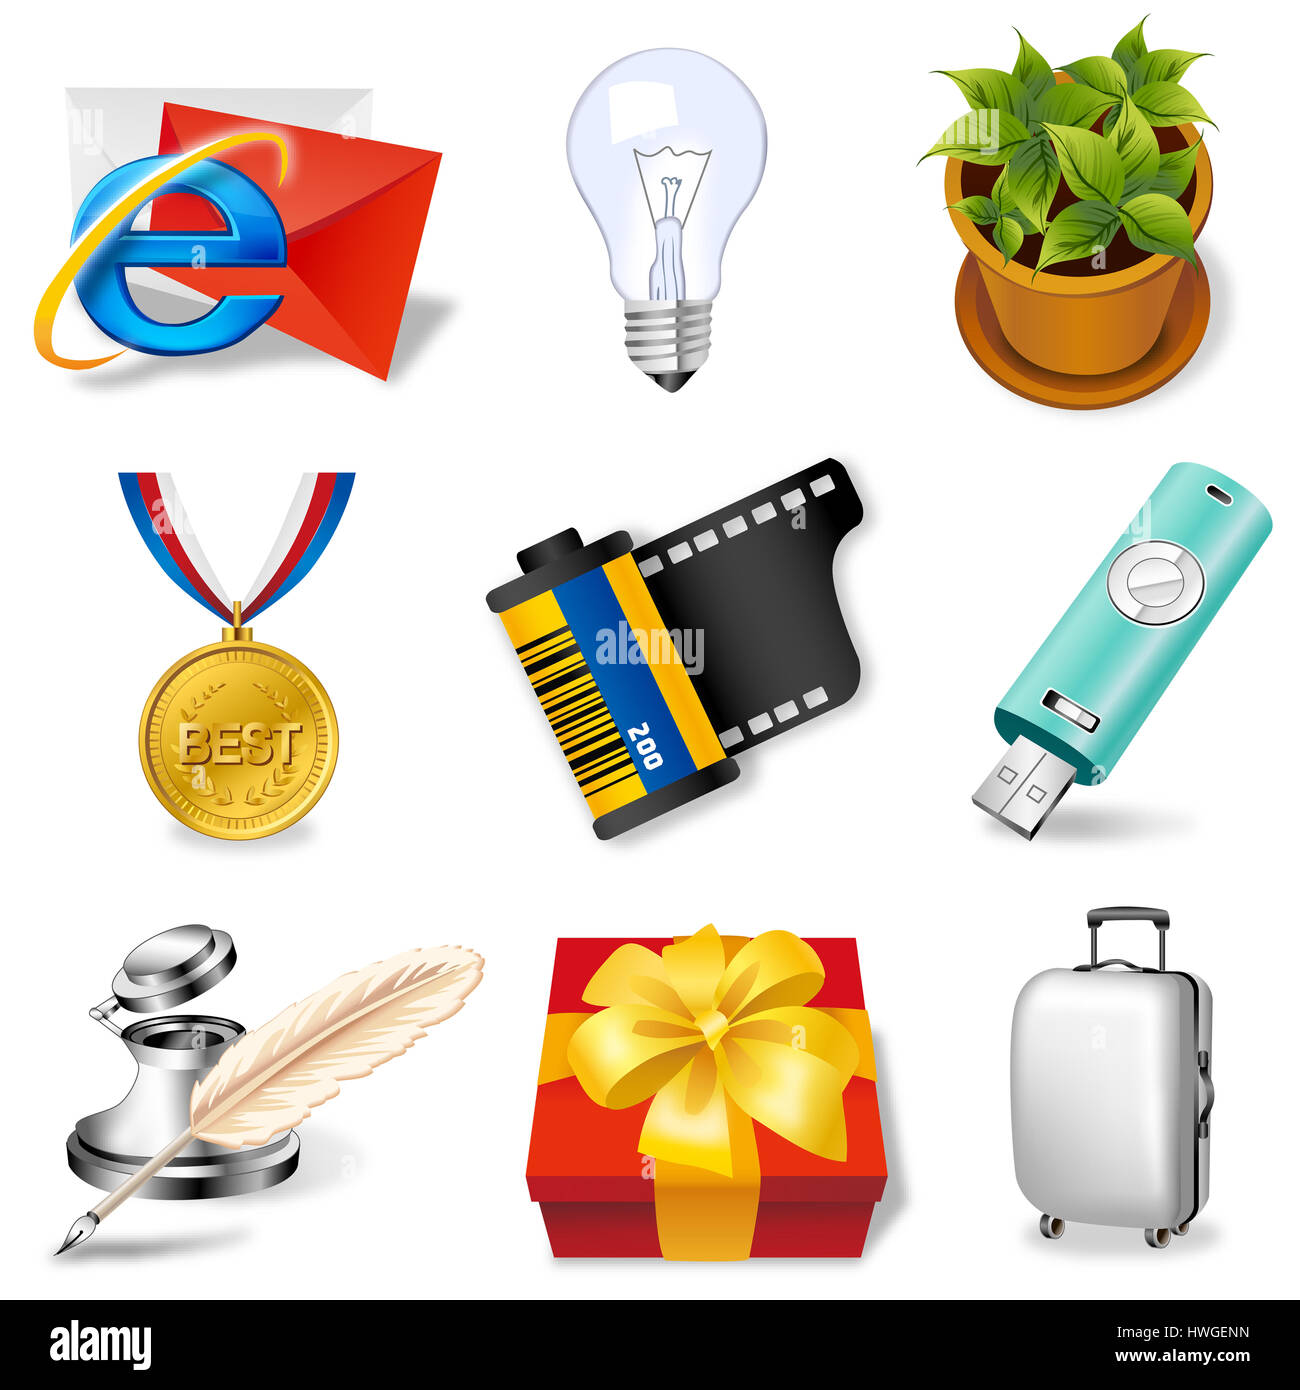 email,internet explorer,internet,net,network,communication,connection,e symbol,sign,envelope,mail,browser,bulb,light,light bulb,electricity,plant,show plant,leaves,pot,medal,reward,achievement,success,roll,photo,negative roll,pen drive,usb,quill,feather,ink pot,gift box,gift,bag,baggage,luggage,travel,white background,symbol,abstract,art,artwork,computer Stock Photo